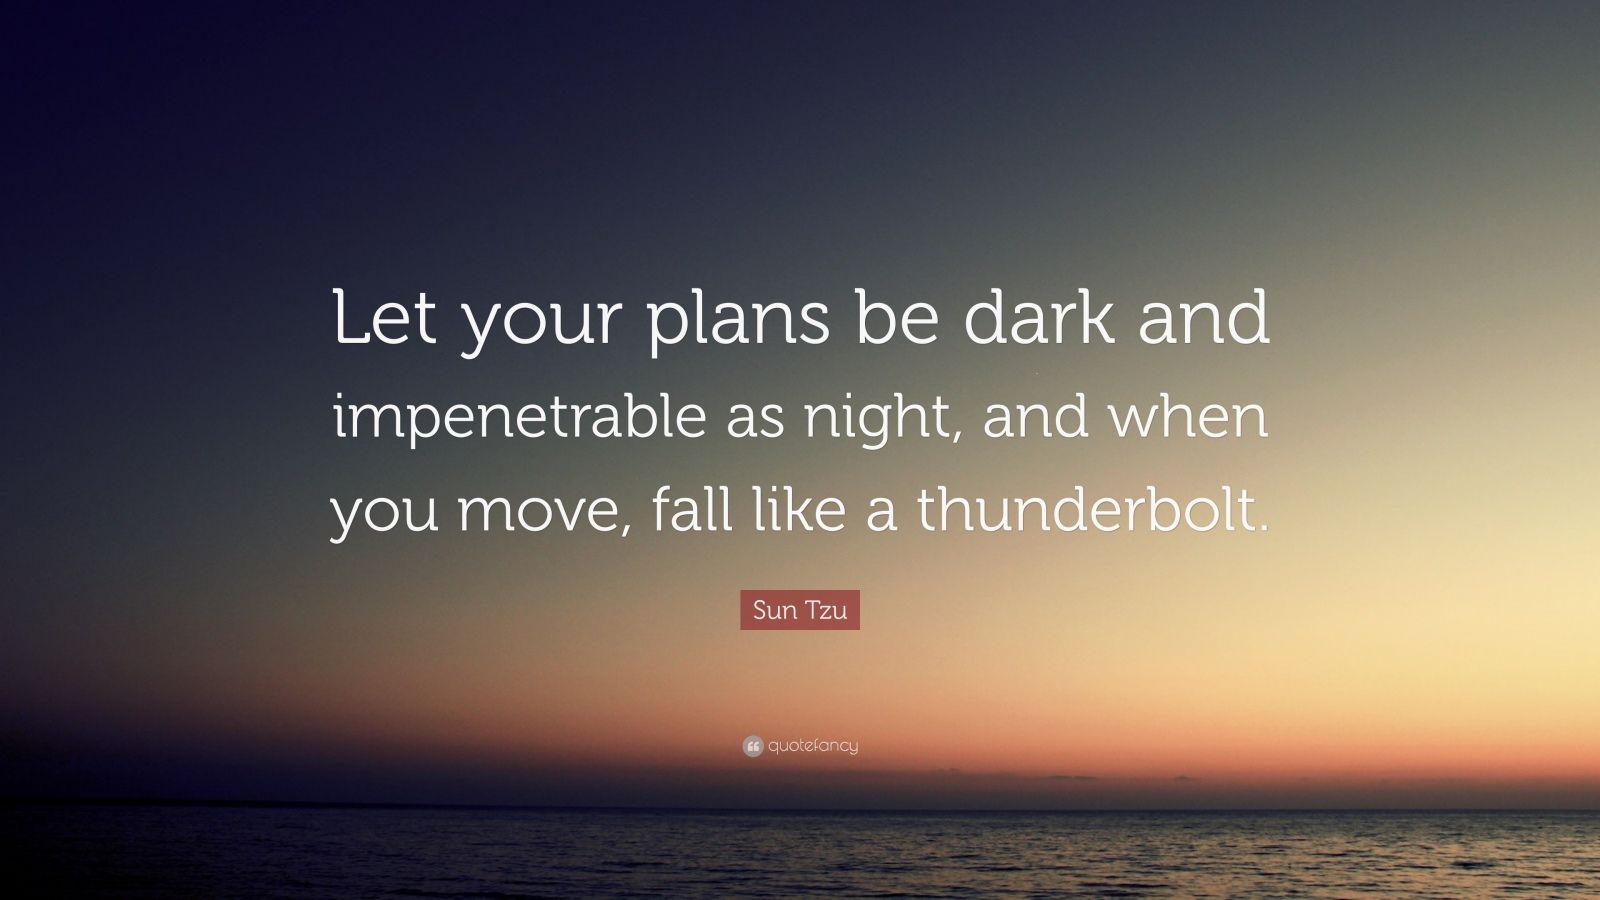 Sun Tzu Quote: “Let your plans be dark and impenetrable as night, and